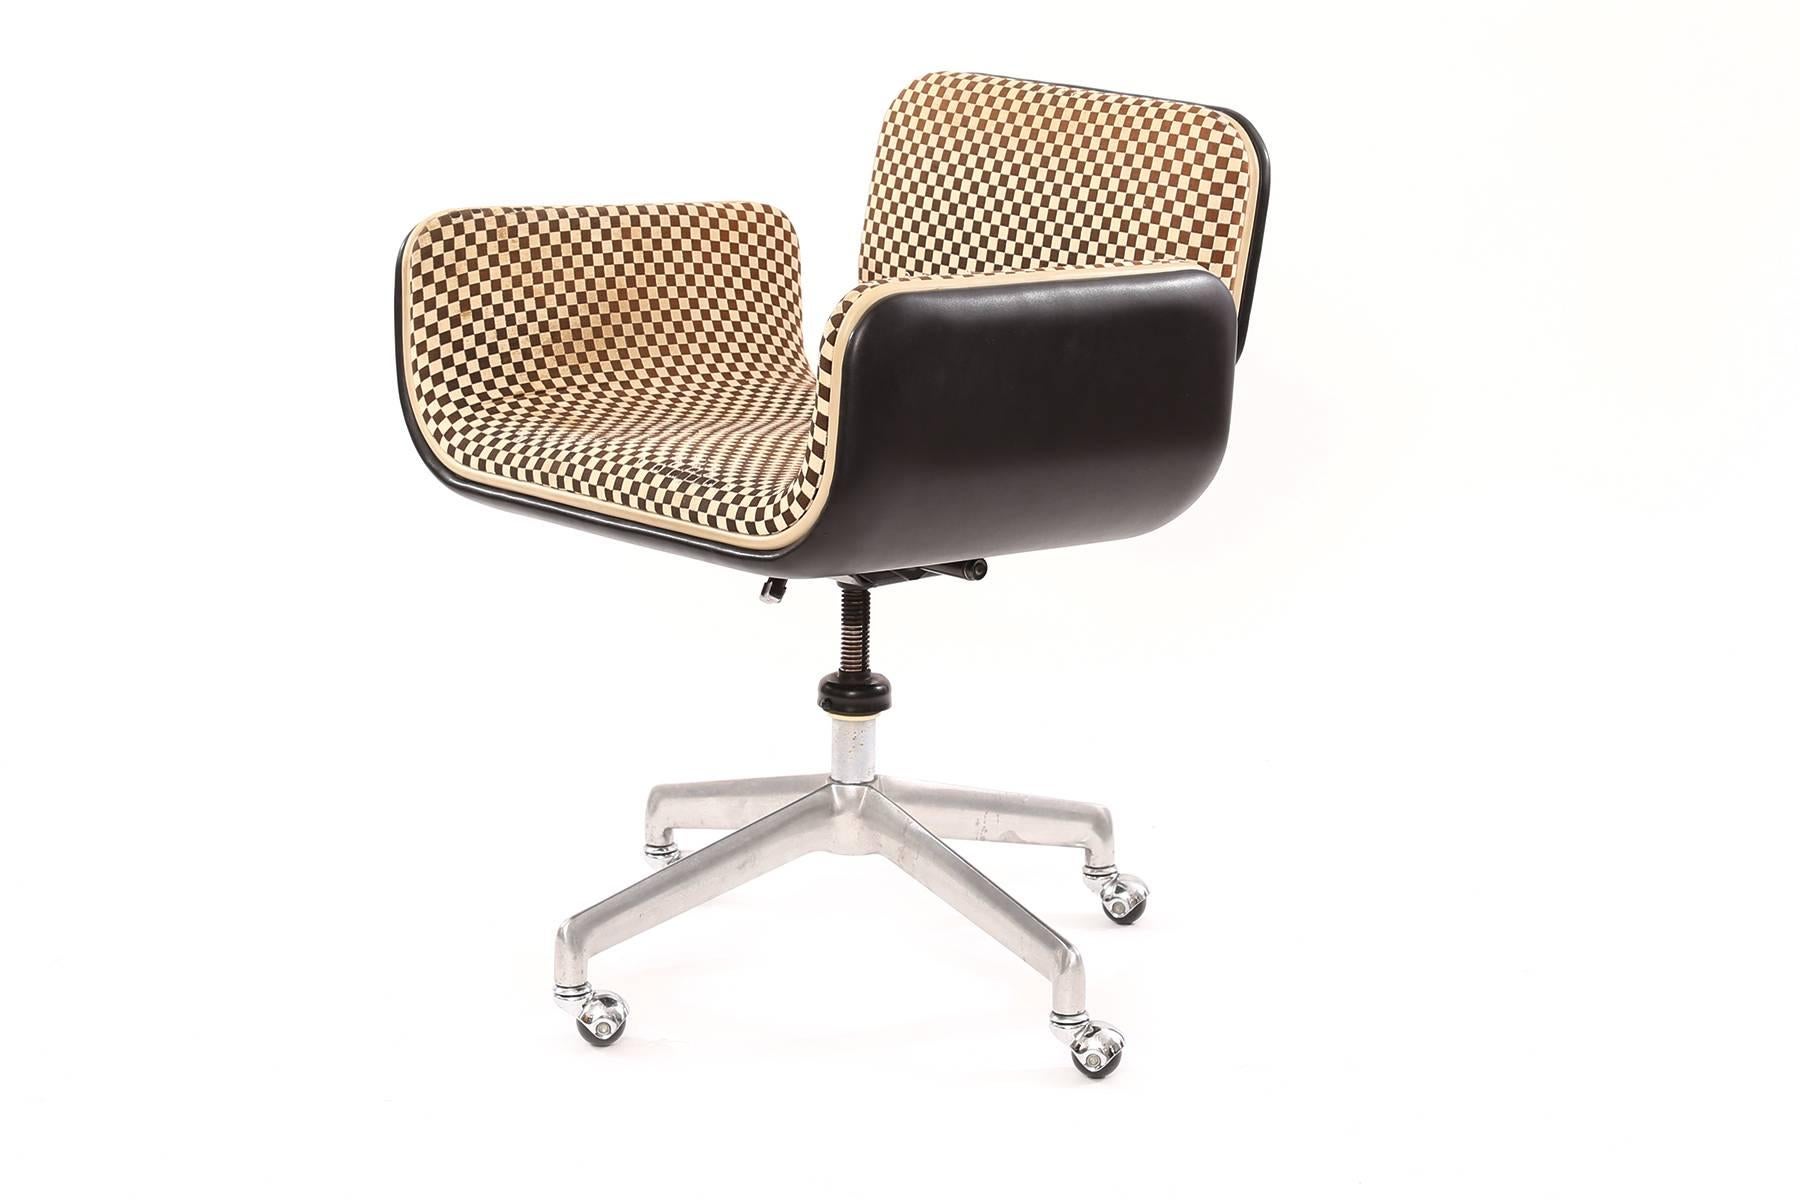 Rare all original Alexander Girard for Herman Miller office chair from 1967. This example has Girard's iconic brown and white checkered upholstery with original black accents on the arms seat bottom and back. Retains original Herman Miller disc tag.